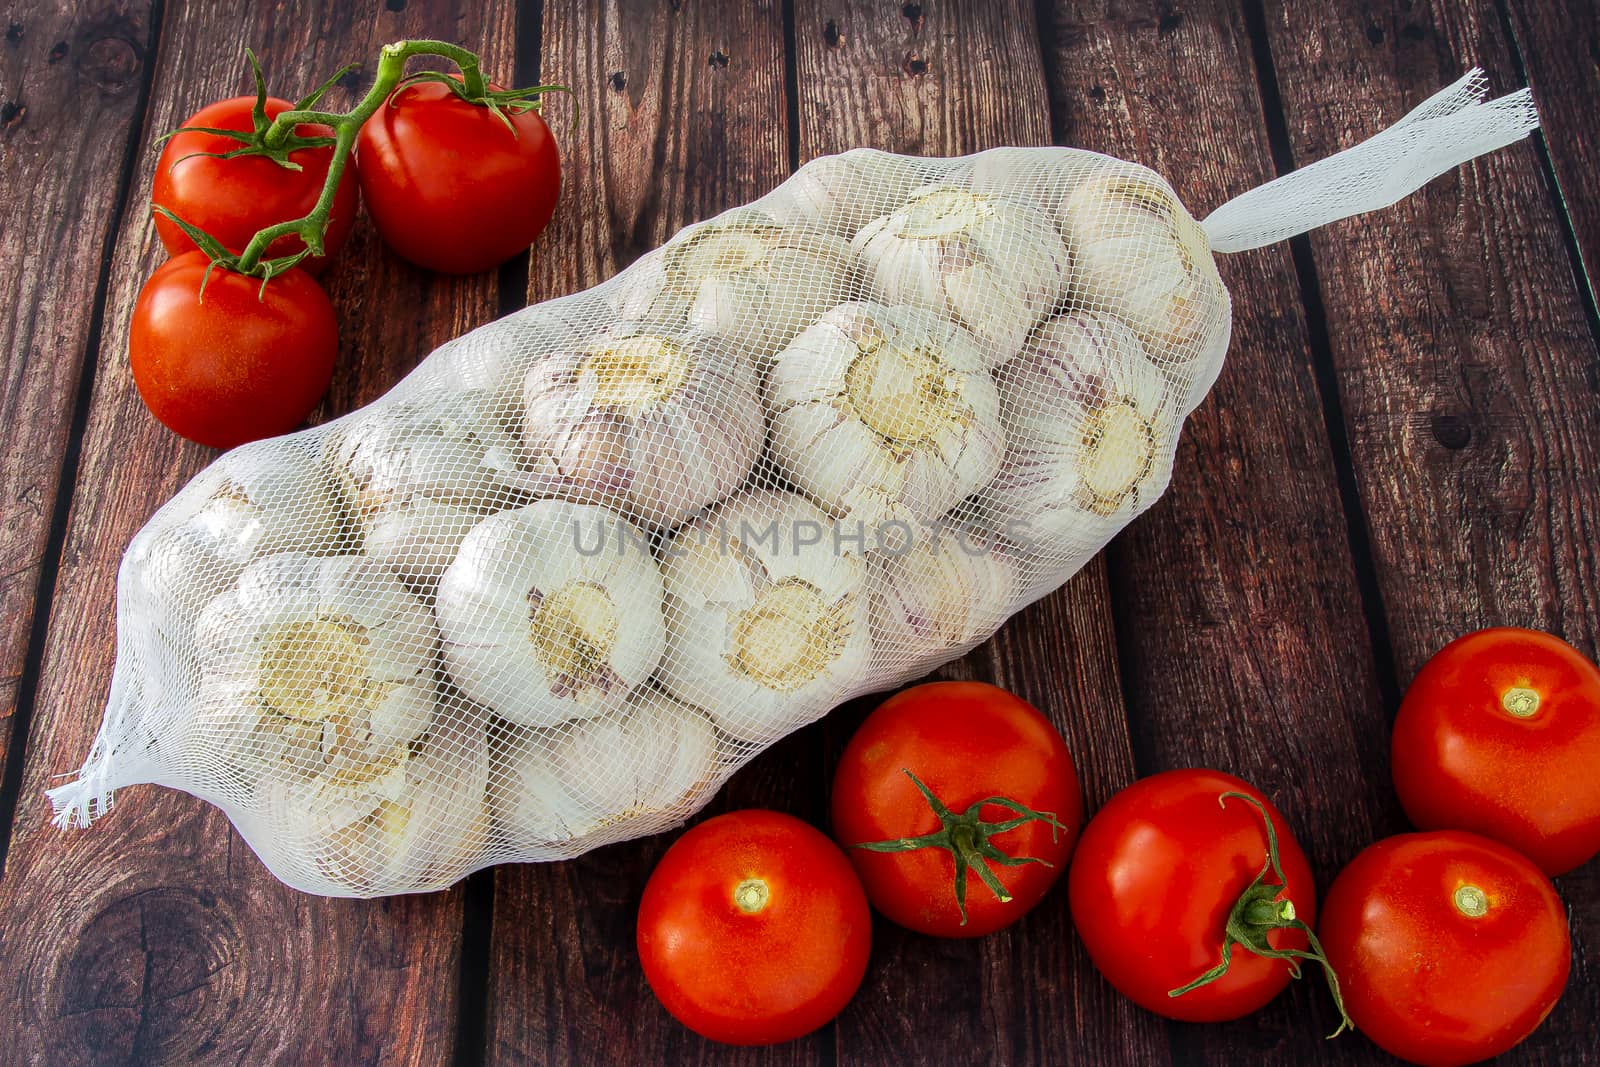 A bag of fresh garlic with tomatoes on a wooden table by oasisamuel